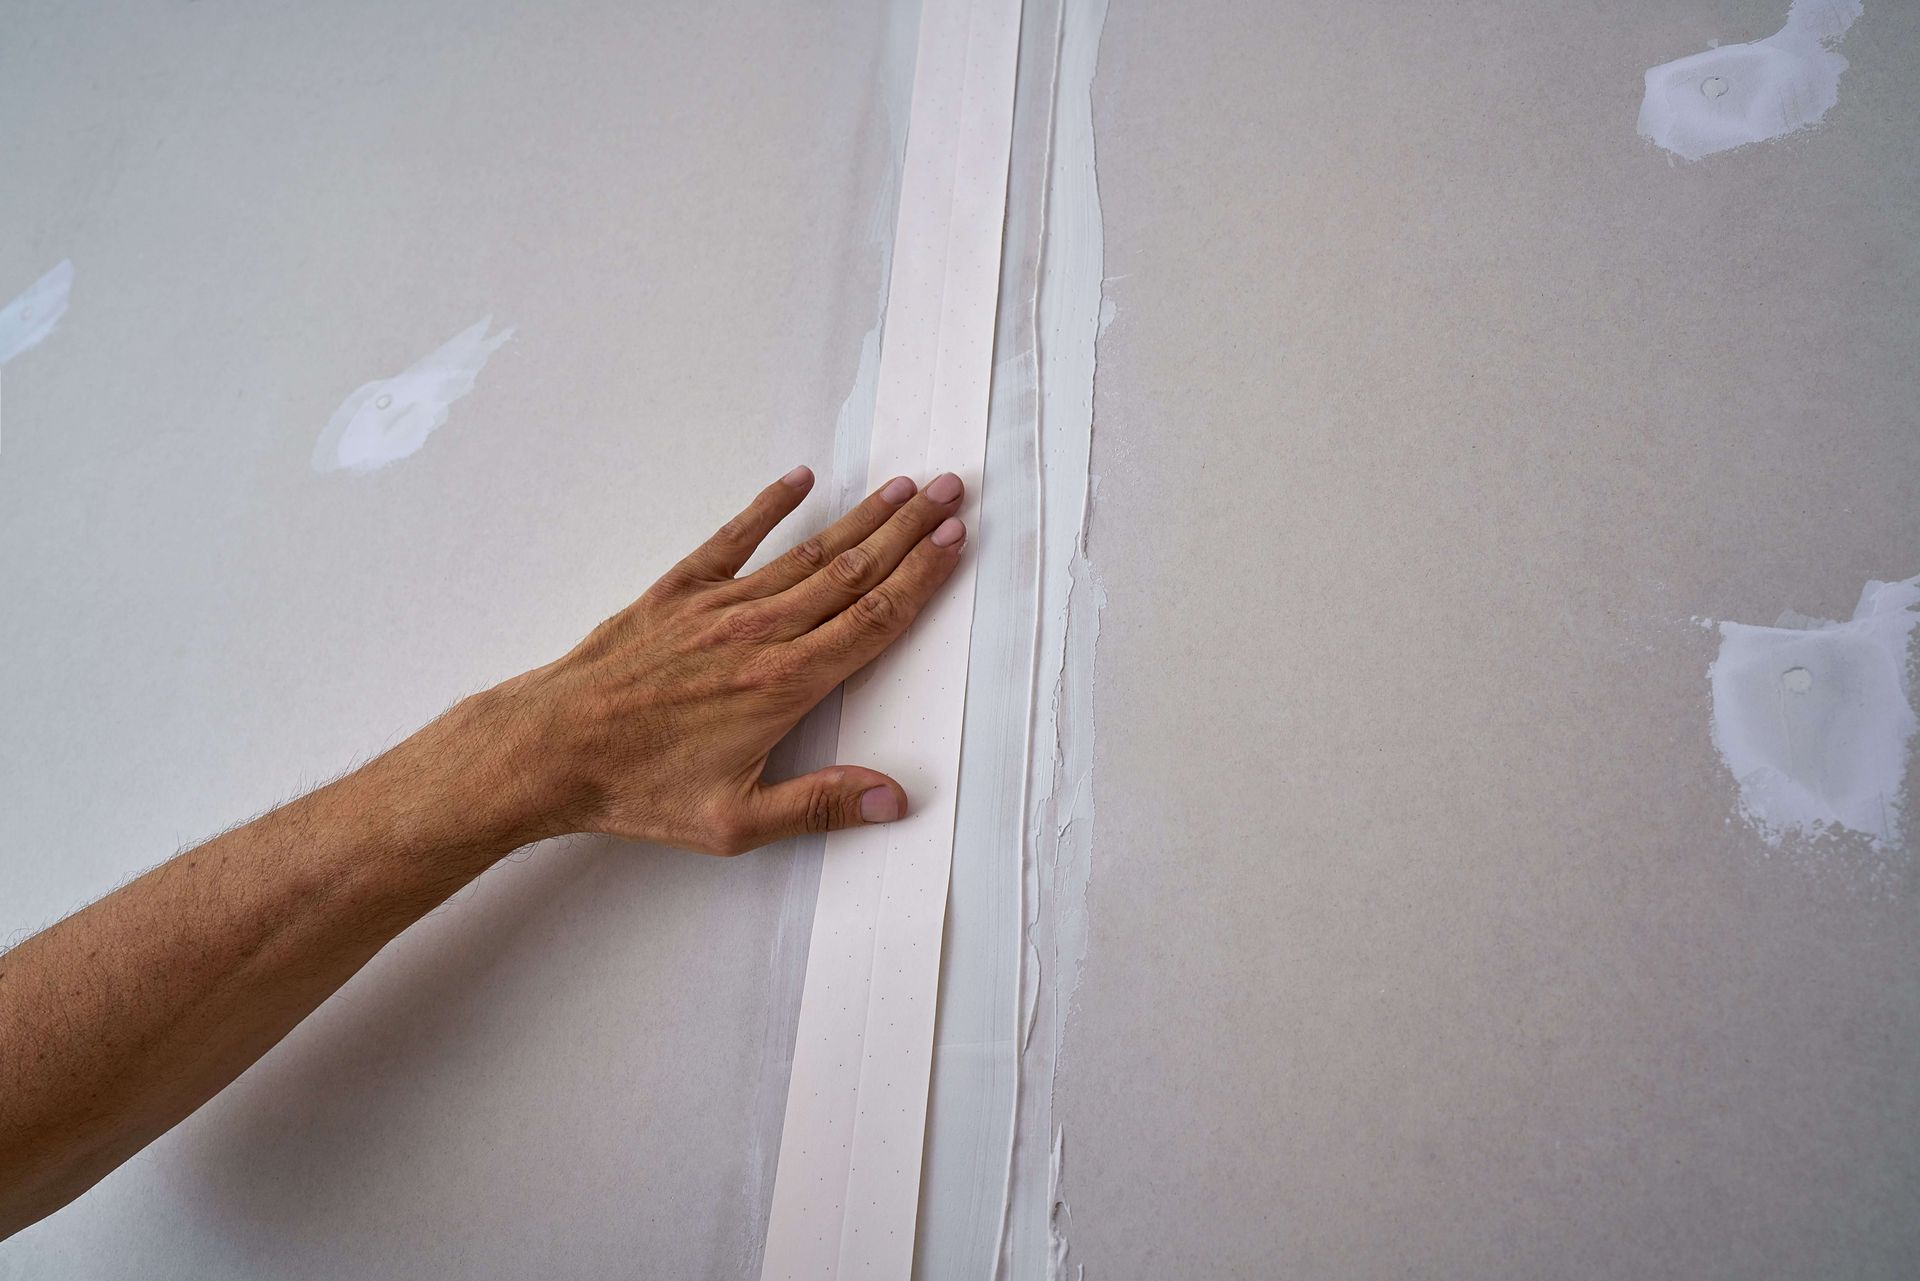 patch drywall in your home with richmond drywall contractors